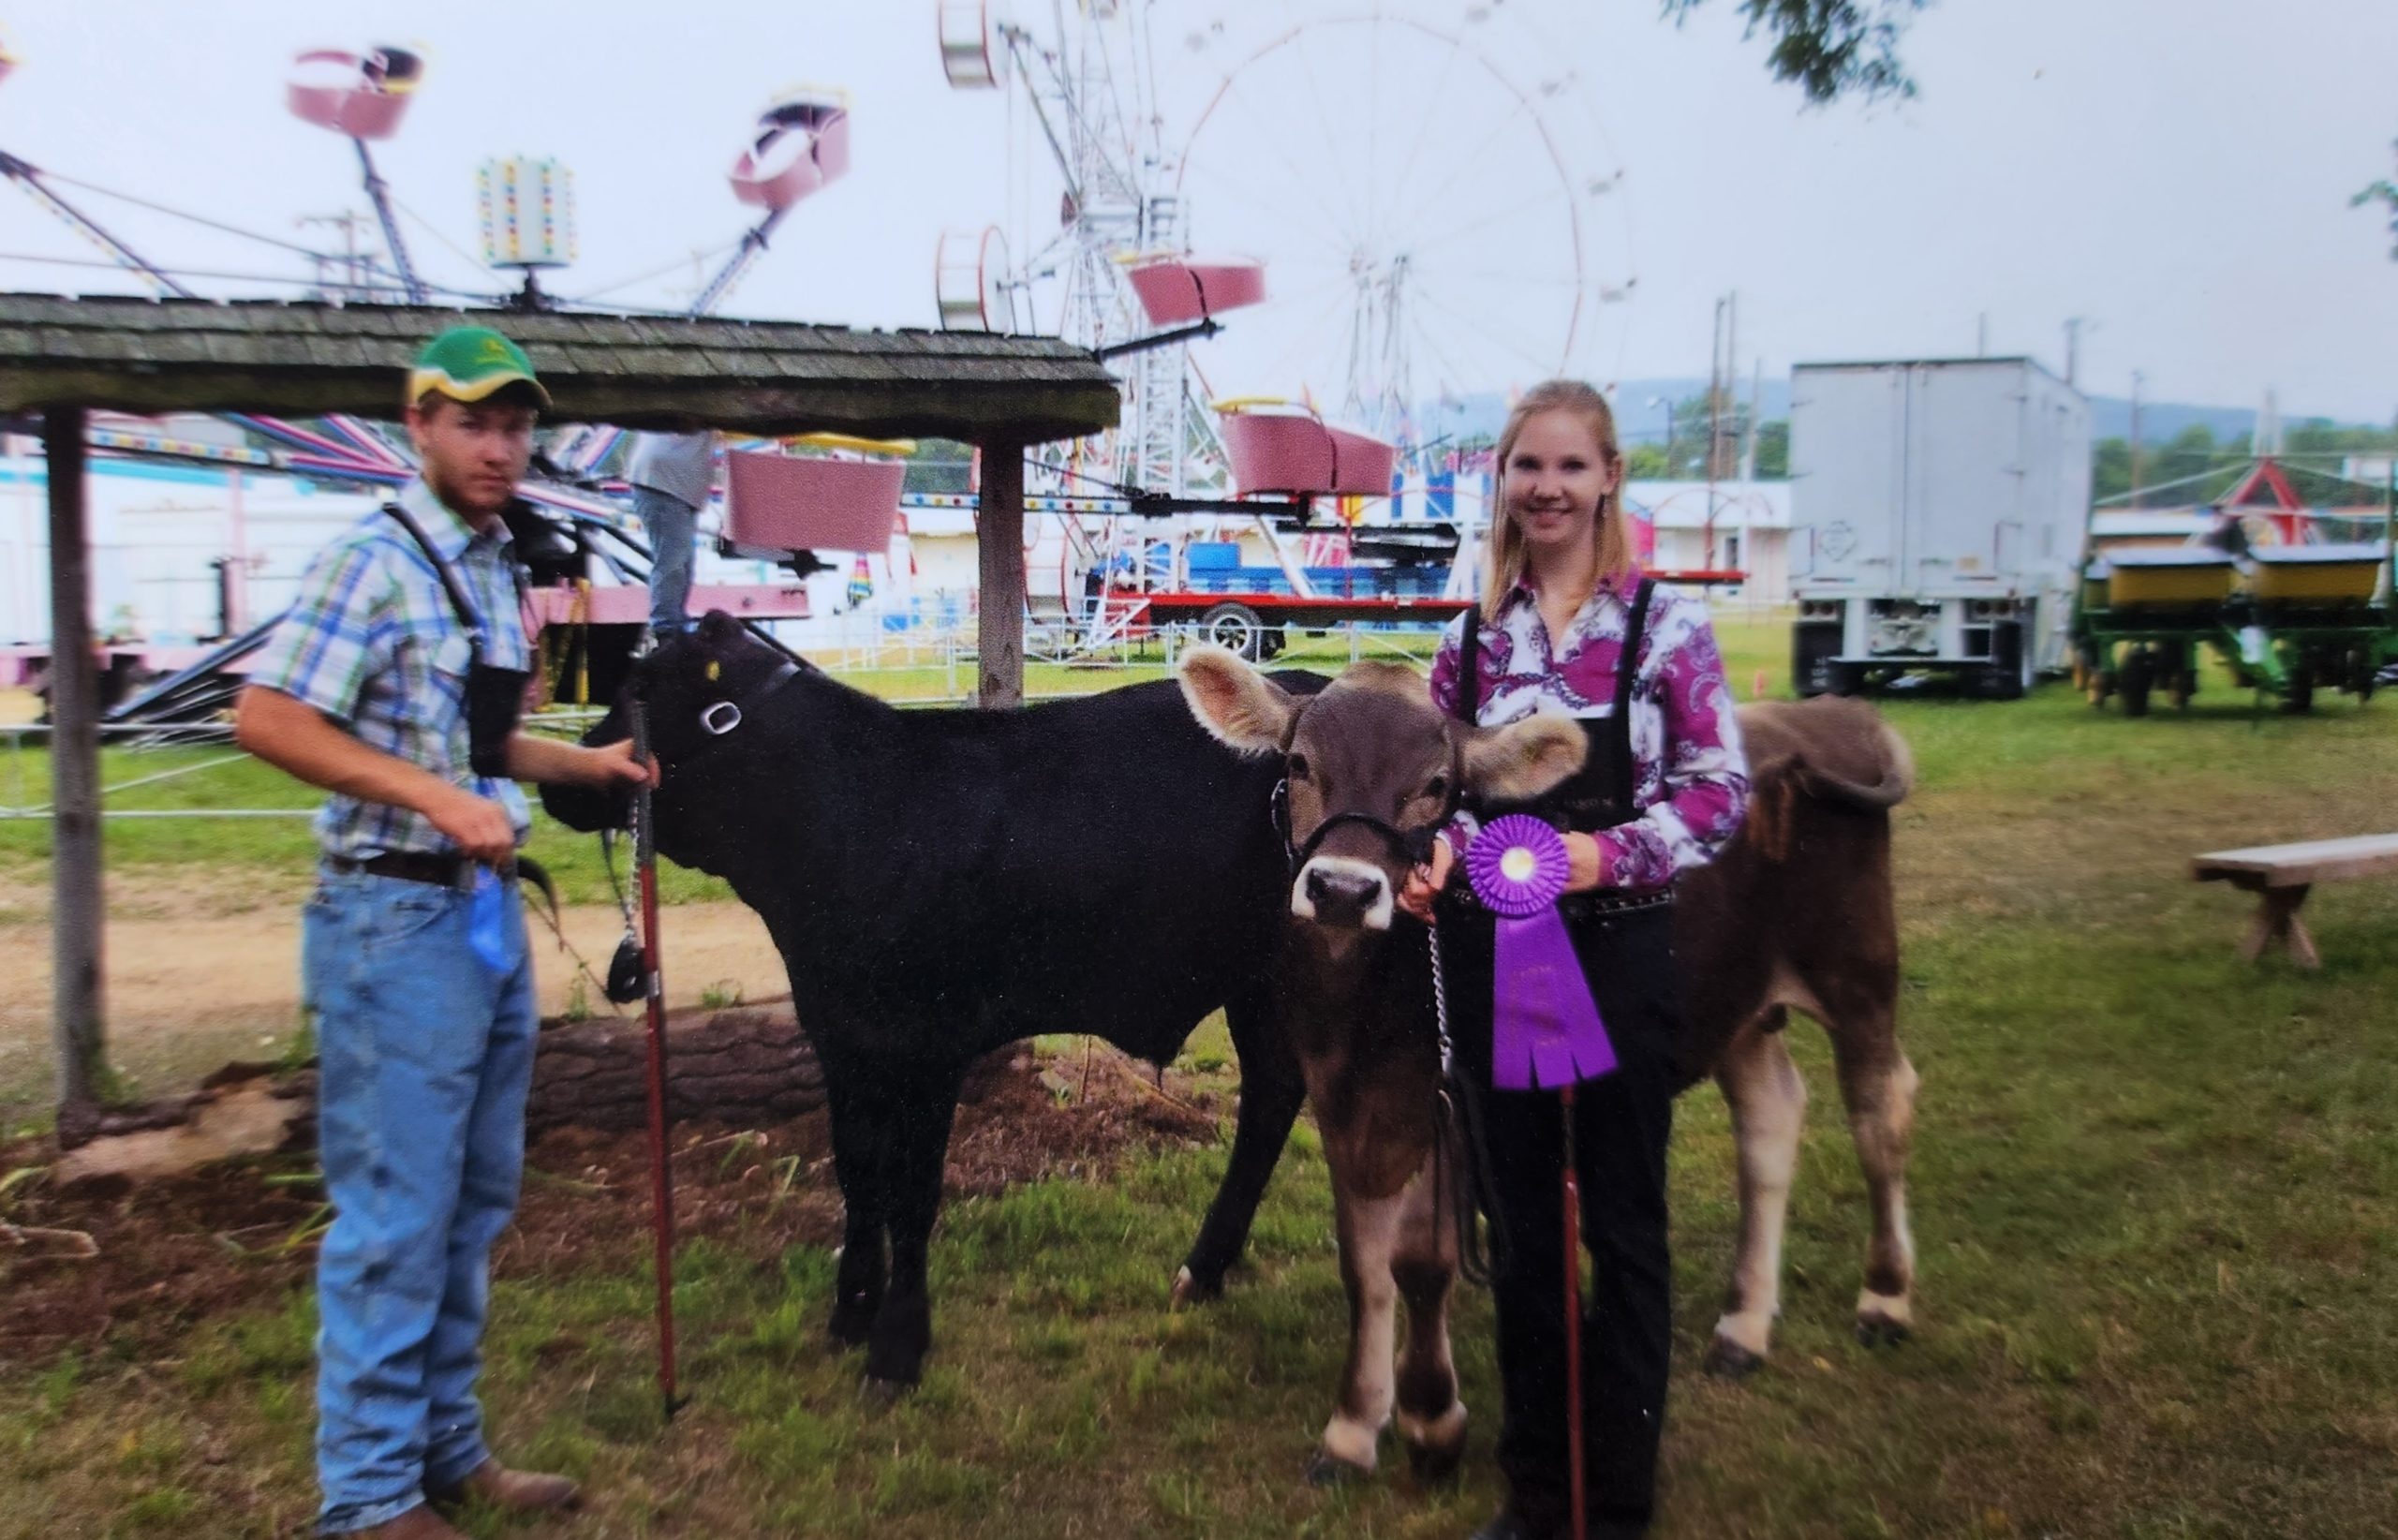 A girl holding a purple ribbon next to two cows and a boy at a fair.